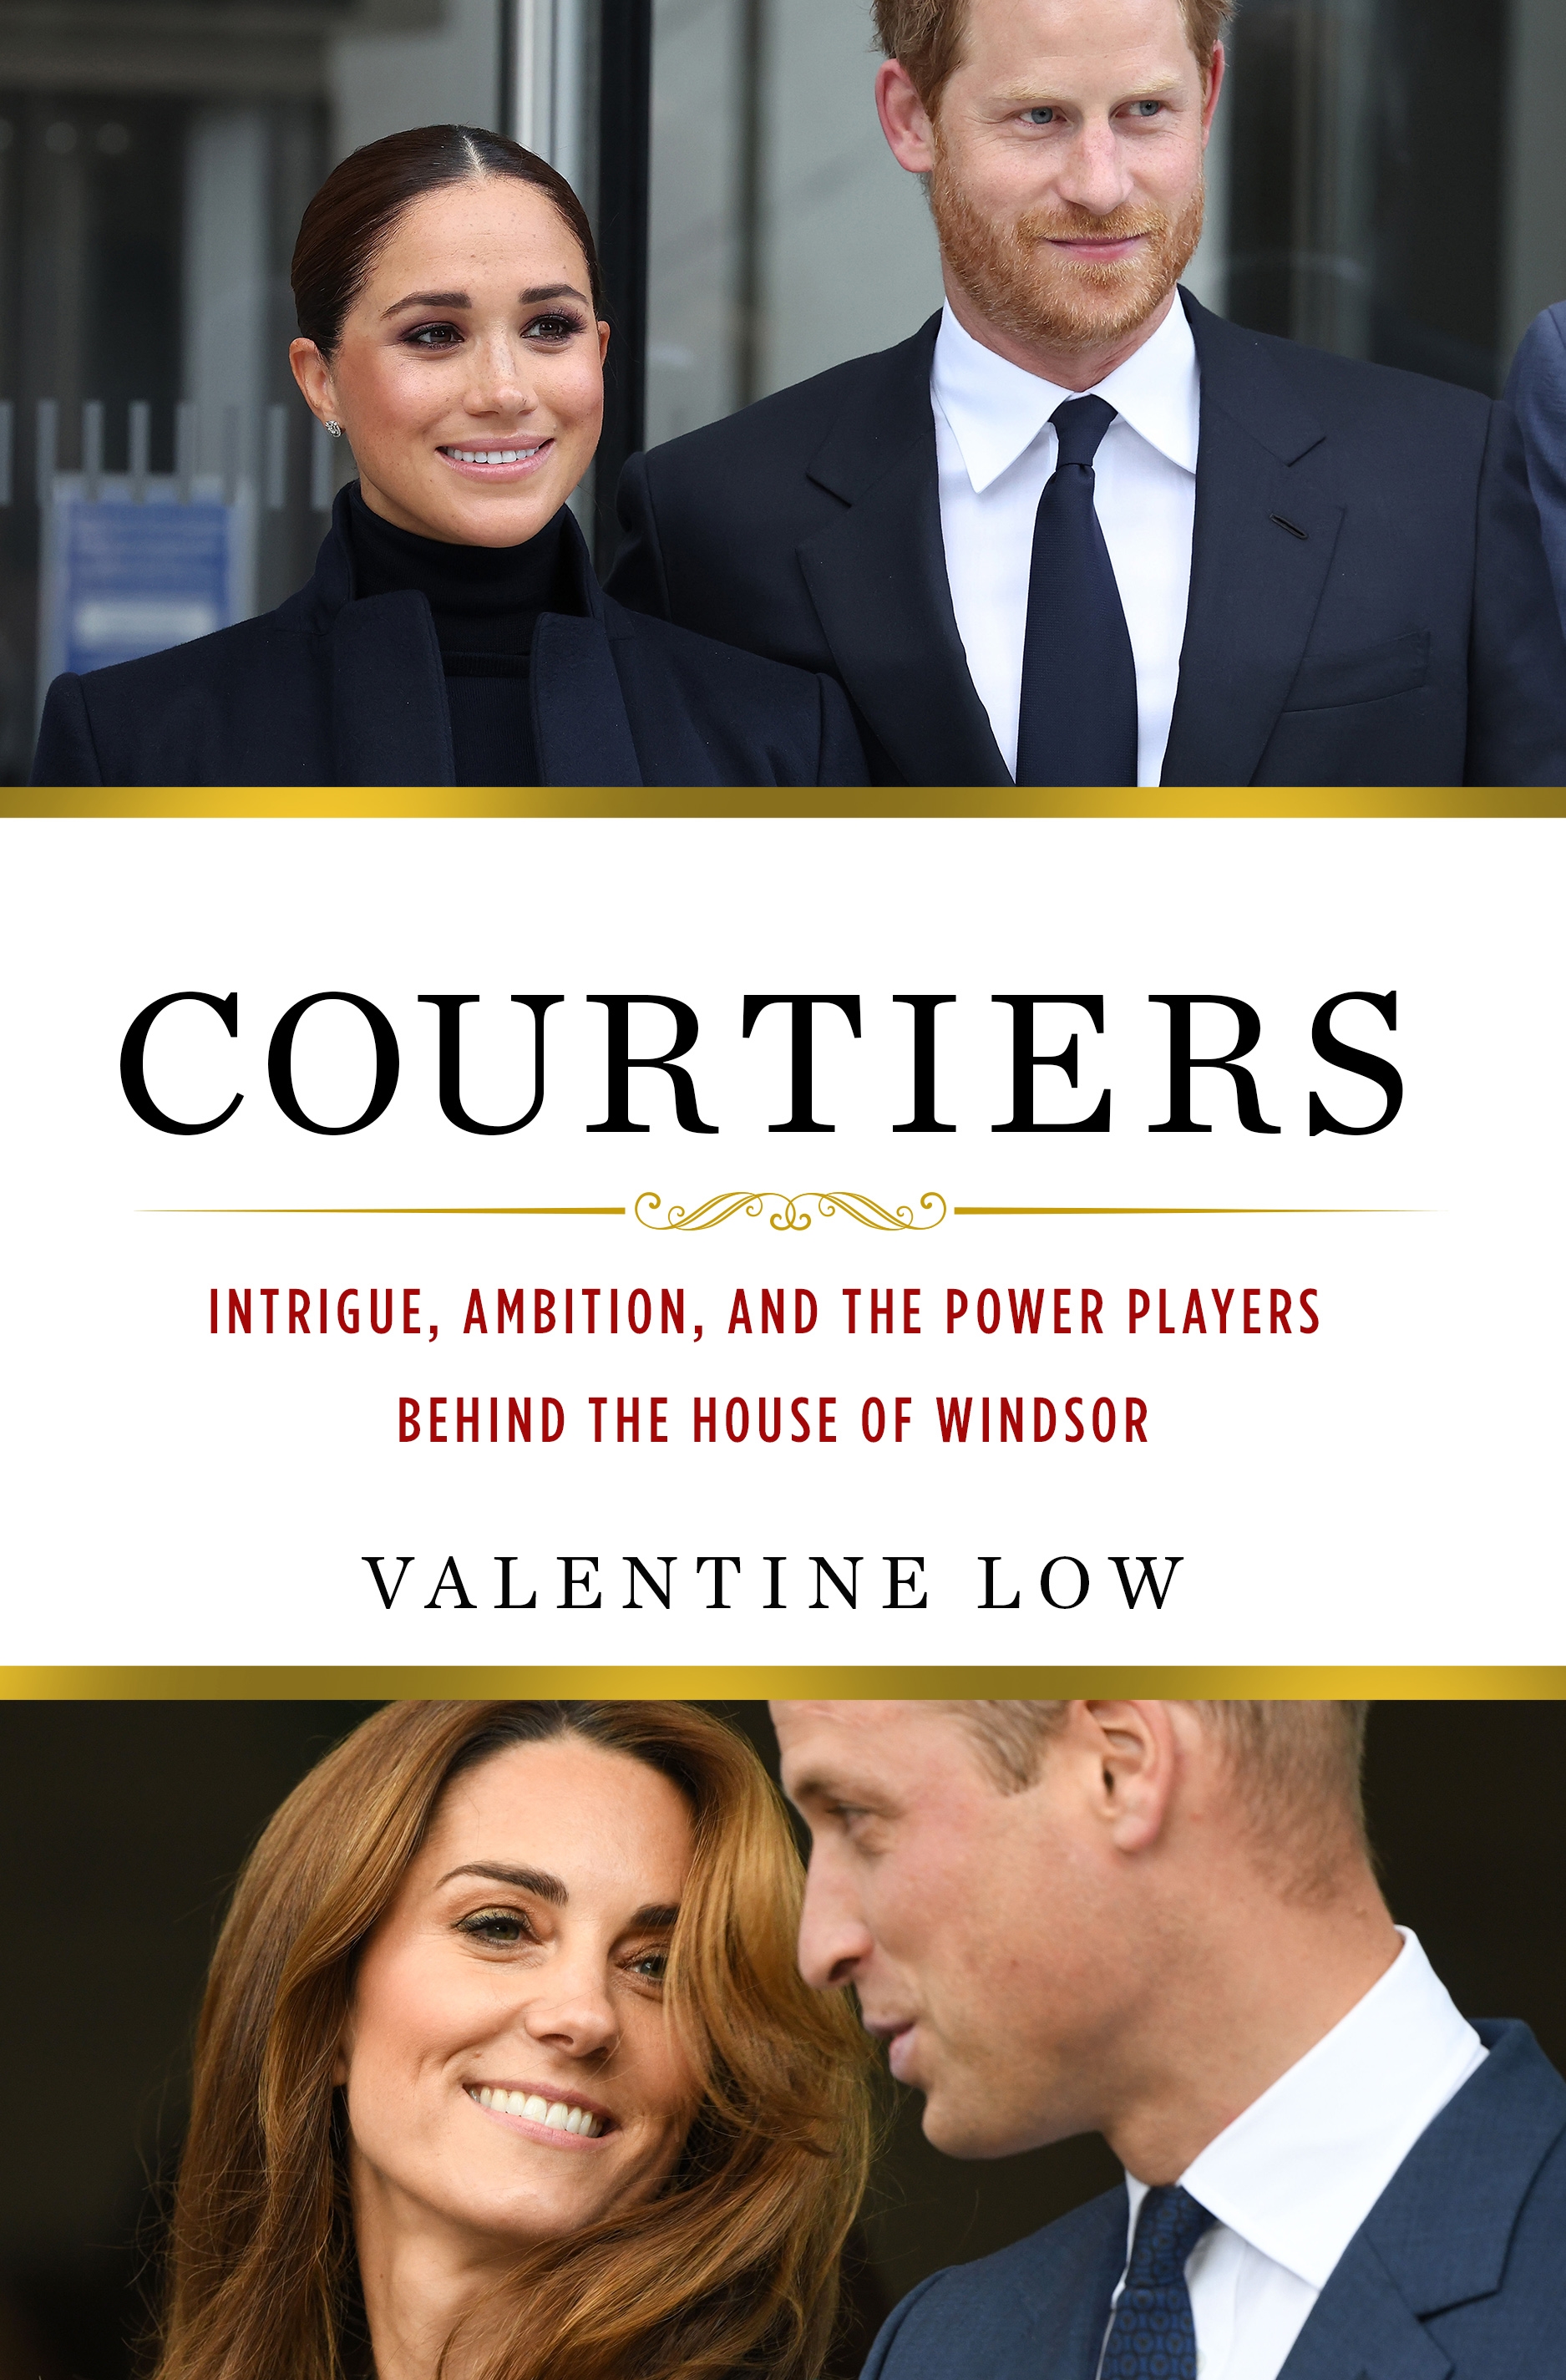 Courtiers Intrigue, Ambition, and the Power Players Behind the House of Windsor cover image